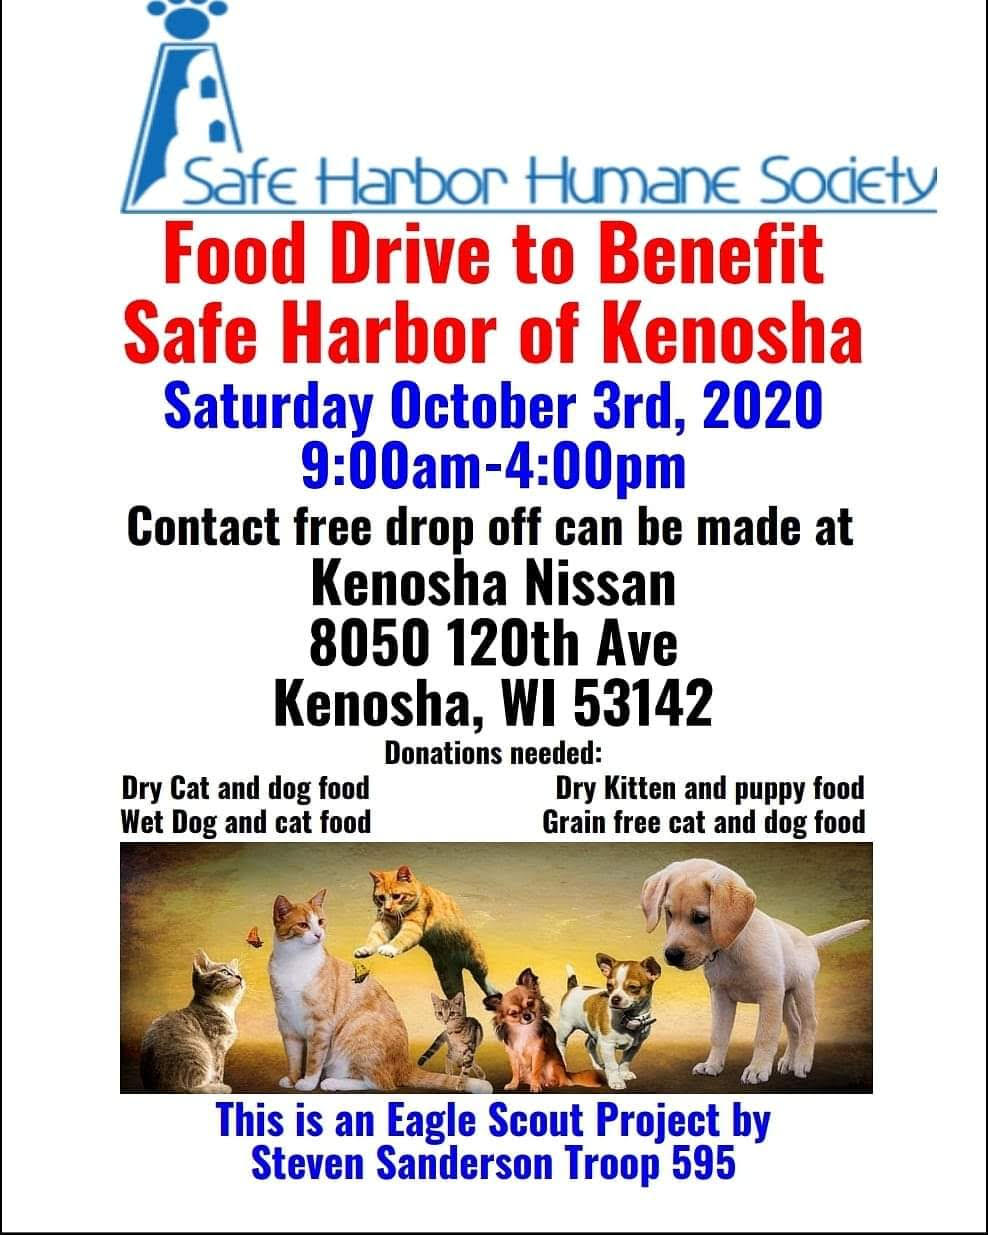 Food Drive Sign With Safe Harbor Humane Society